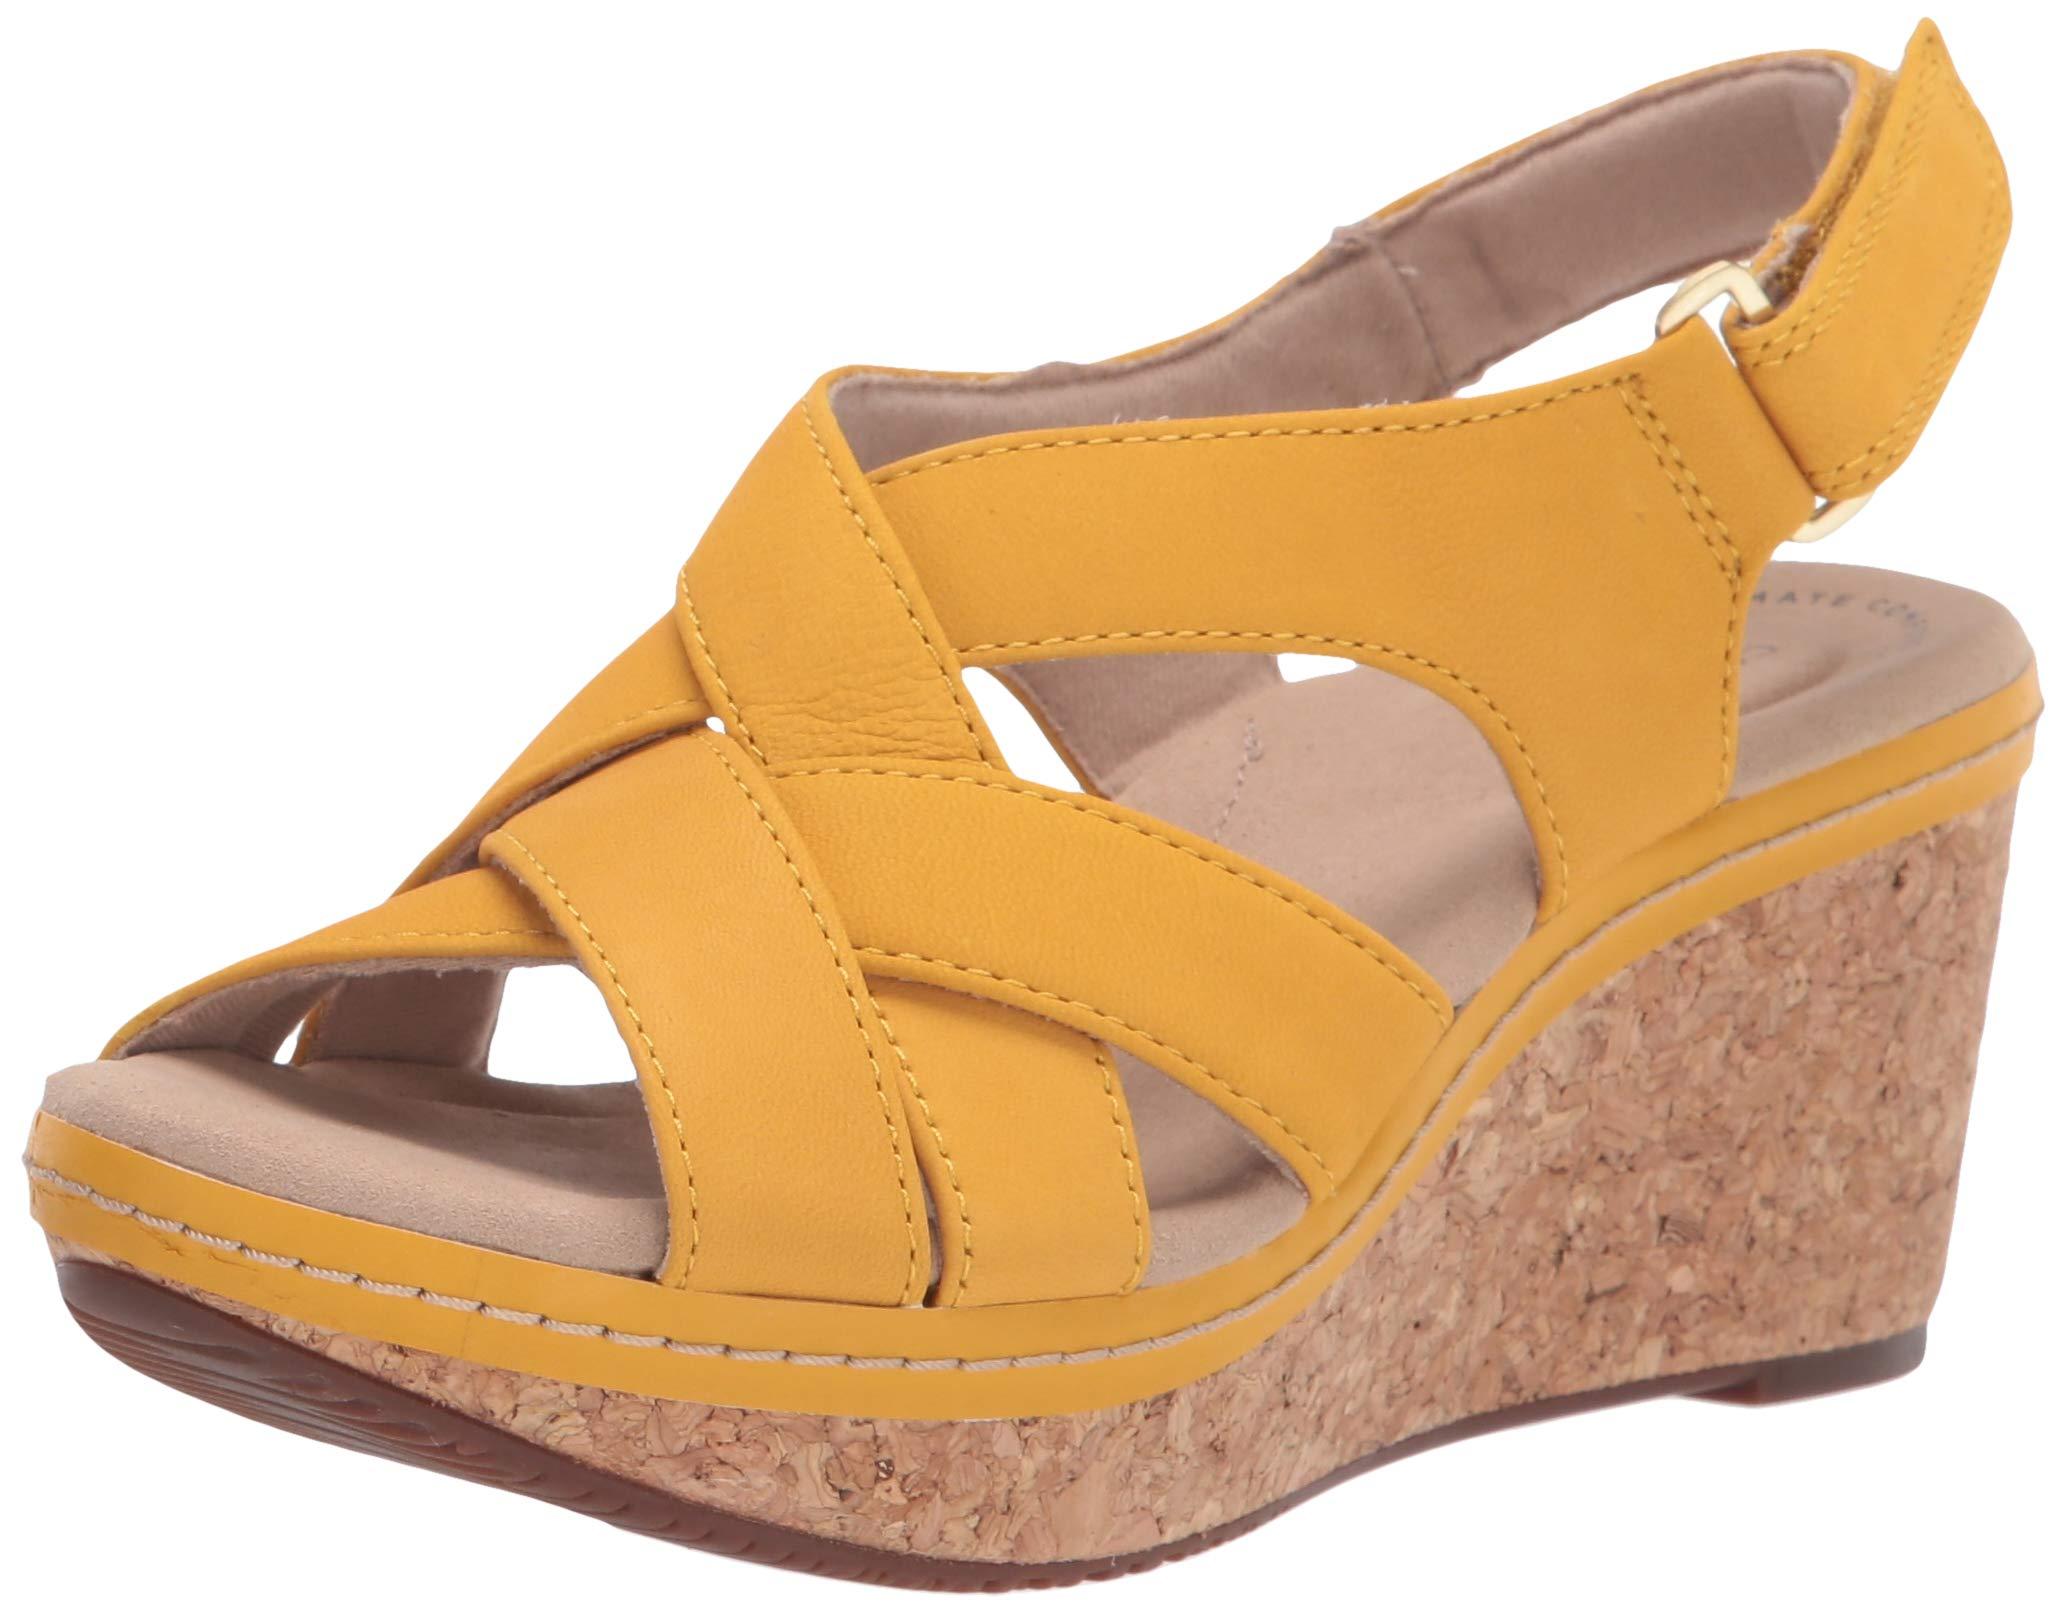 Clarks Annadel Pearl Wedge Sandal in White Leather (Yellow) | Lyst